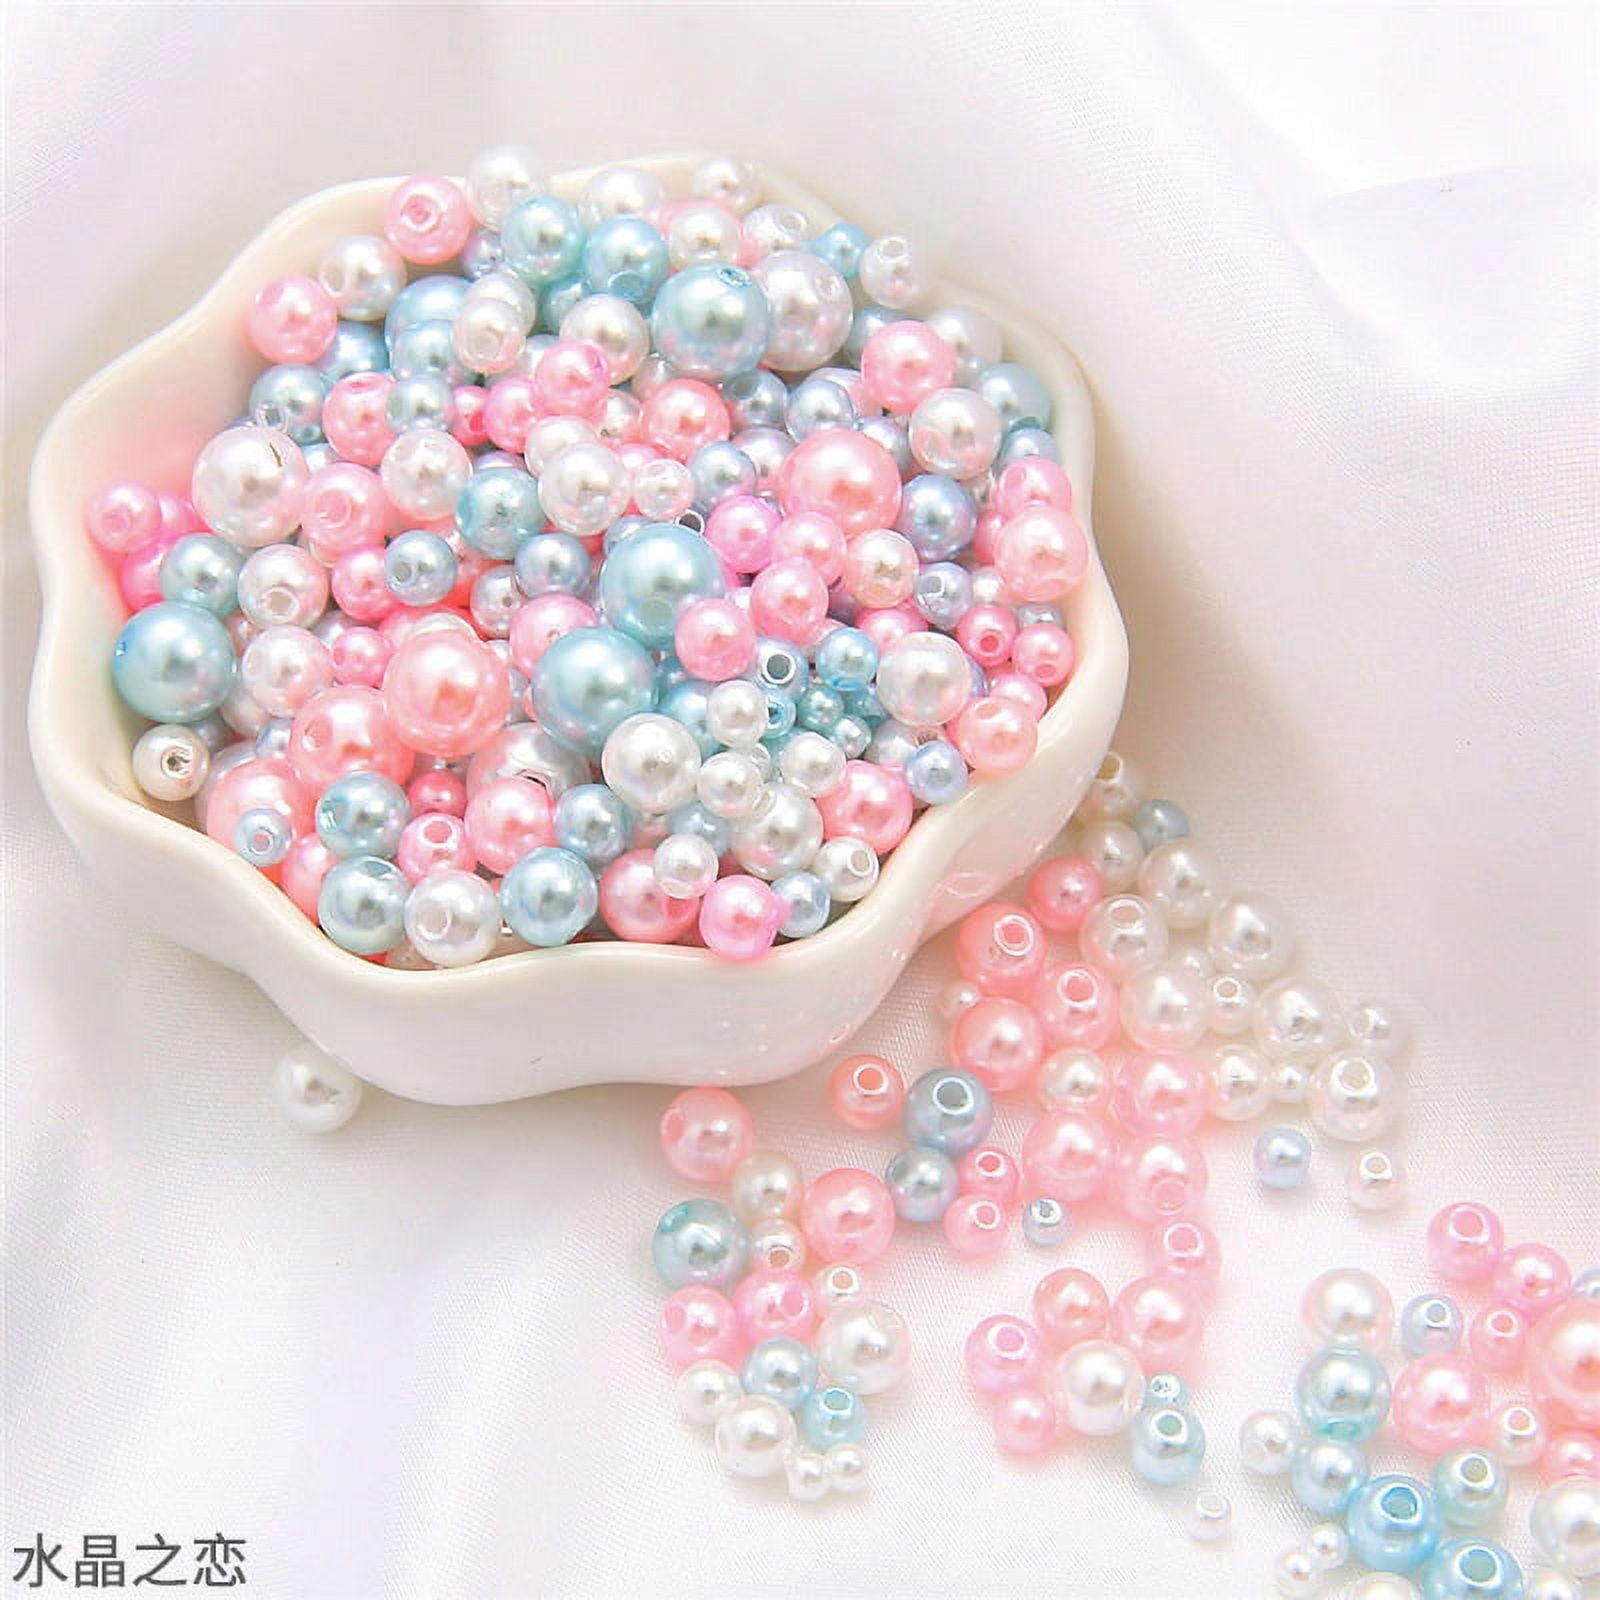 Niziky 900PCS 3-8mm Crafts No Hole Pearls, Macaron Loose Pearls Beads  Without Holes, Round No Hole Pearls Vase Fillers, Pearls for Crafts,  Wedding